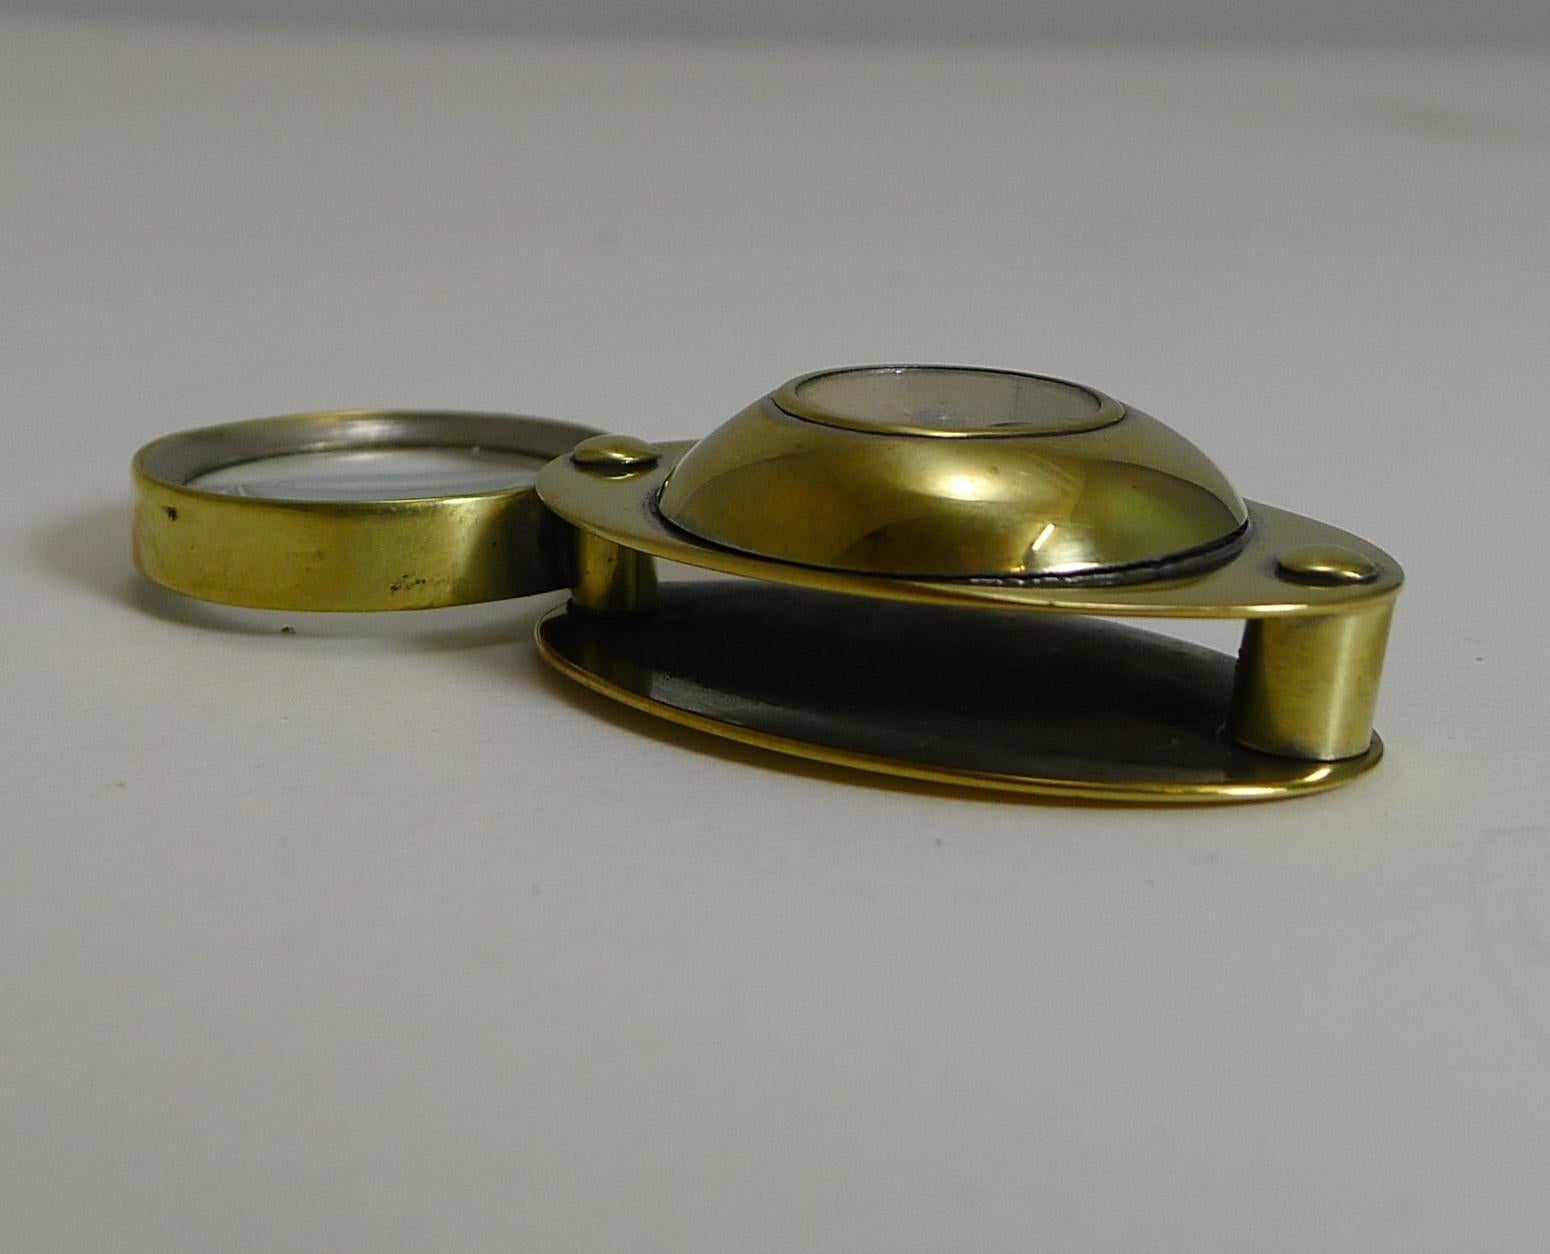 A charming little folding loop or magnifying glass made from brass, dating to the early twentieth century, c.1910.

What of course makes it highly collectable is the inset working compass. A novelty piece in excellent condition. 1 1/2